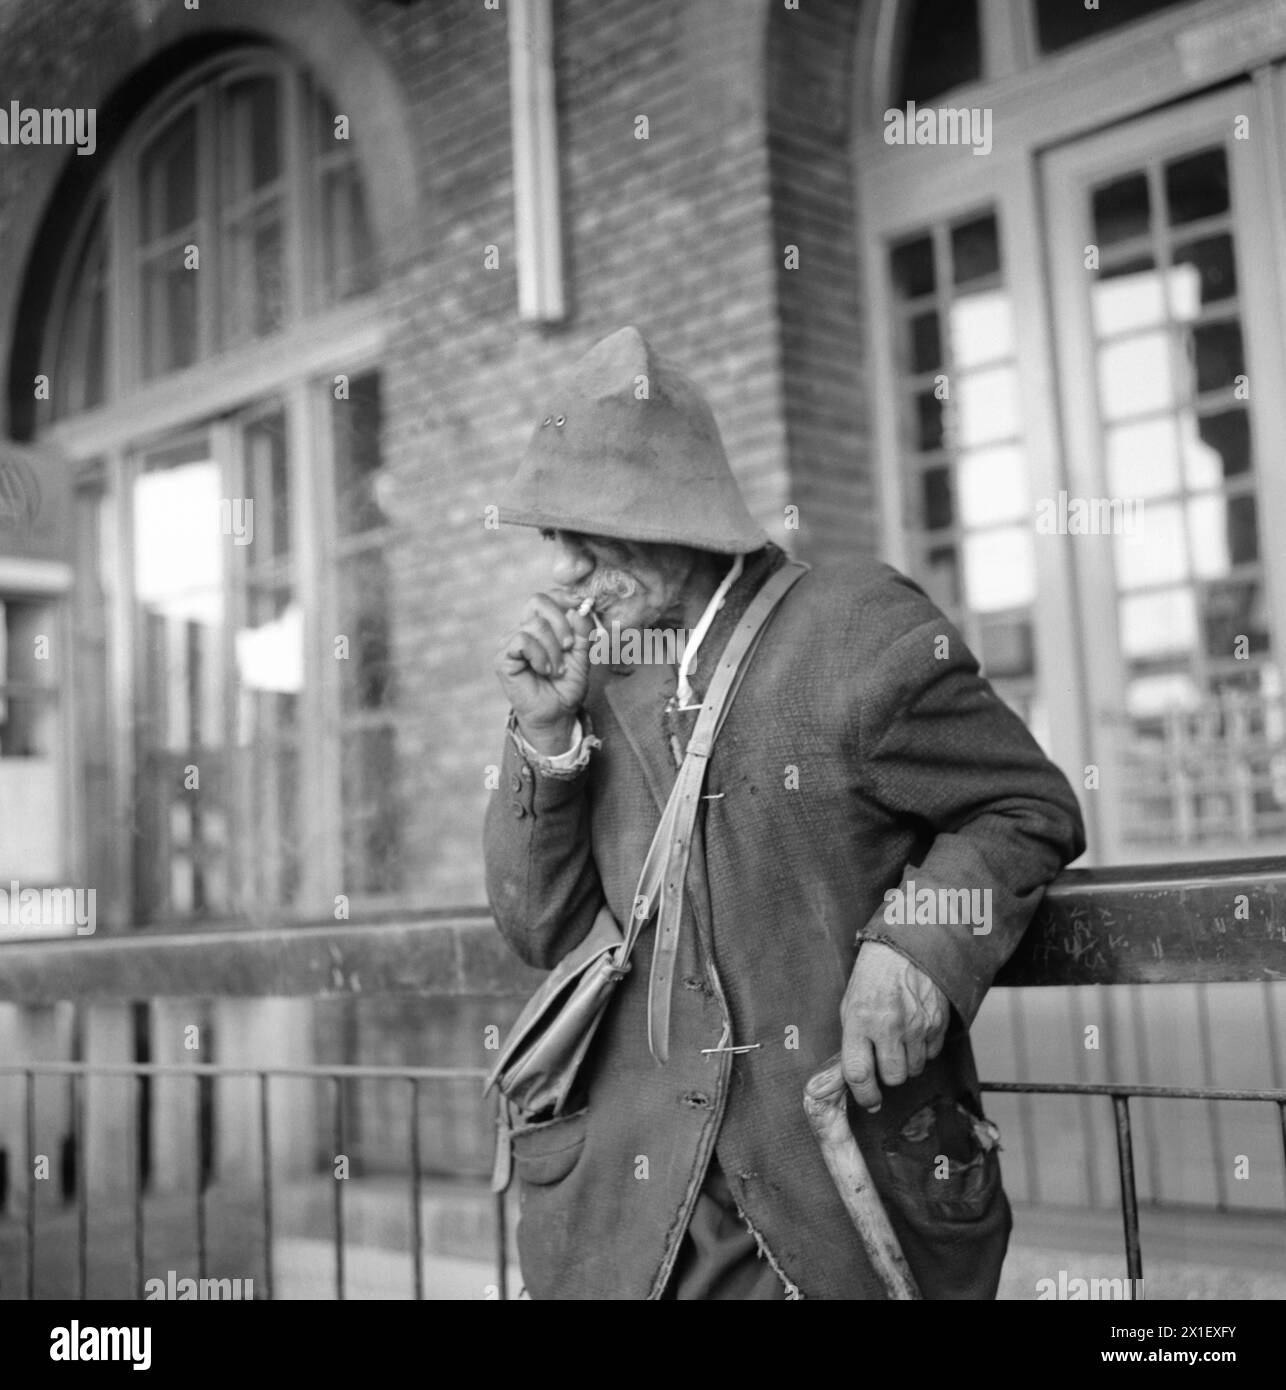 Socialist Republic of Romania in the 1970s. Homeless man outside a train station smoking a cigarette. Stock Photo